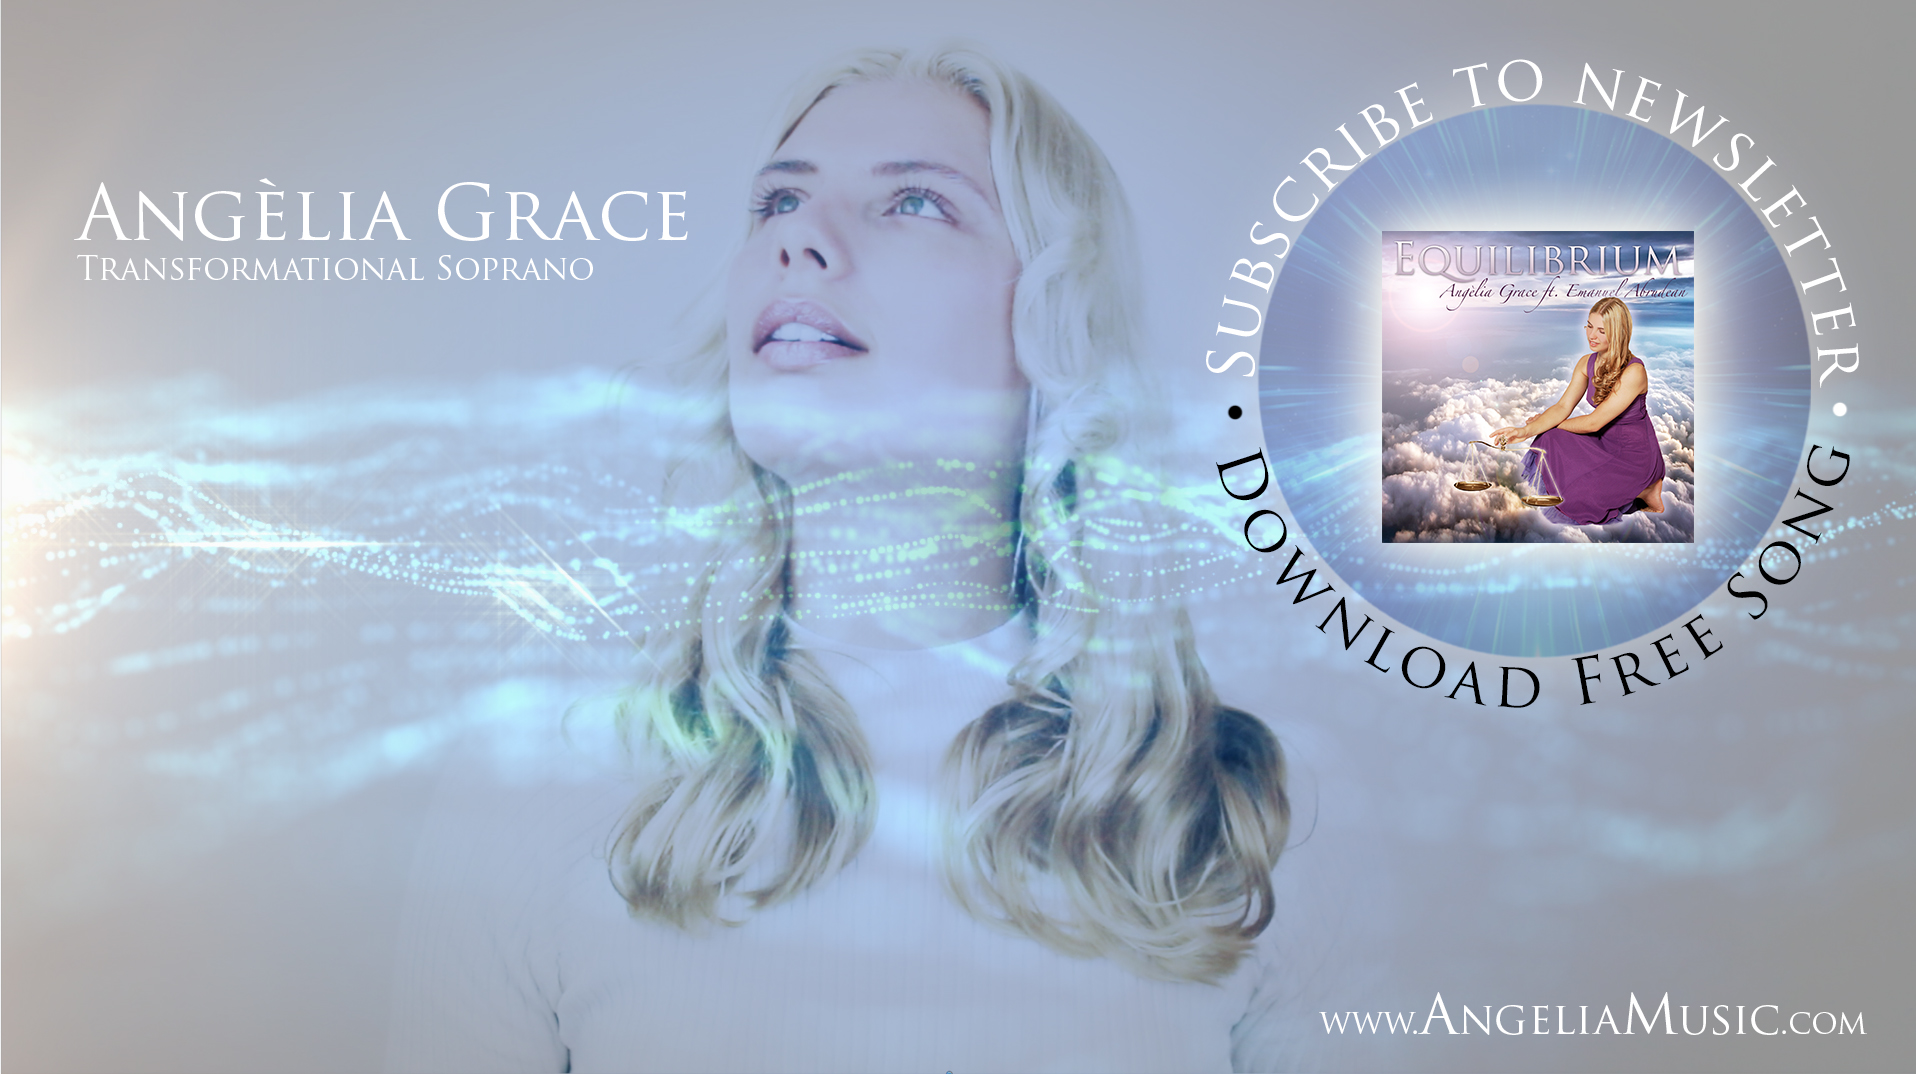 Download free song from Angèlia Grace